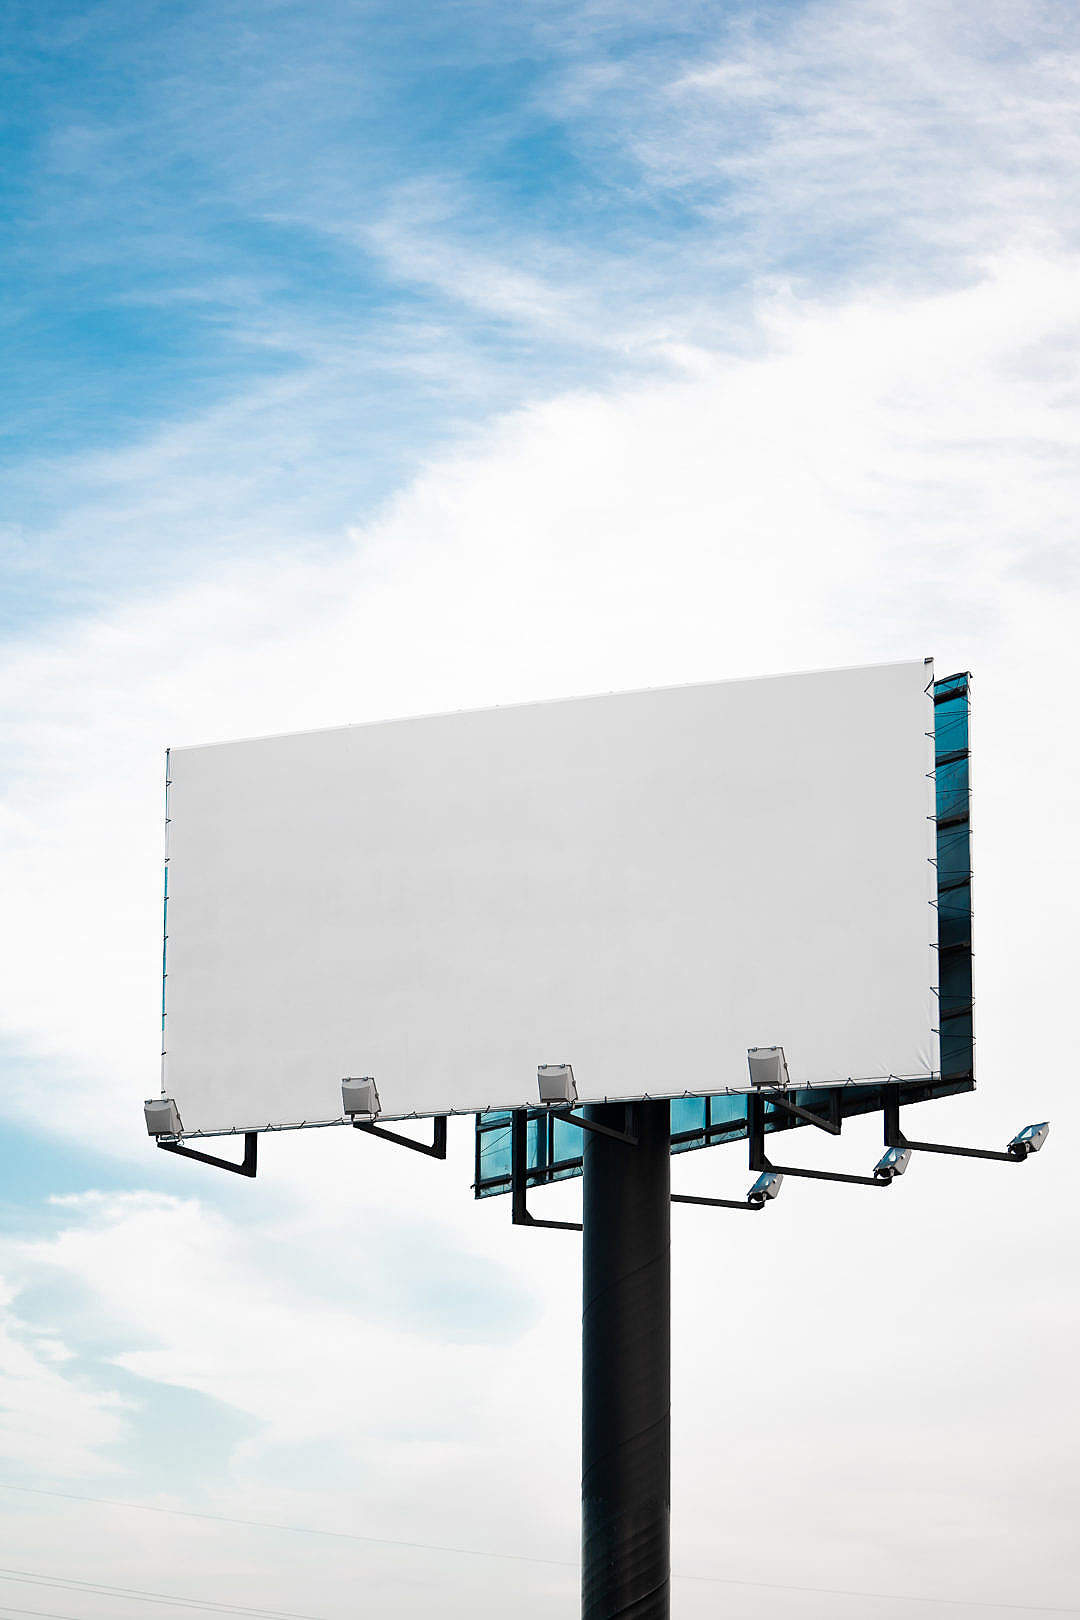 Download Blank Billboard For Advertising With Cloudy Sky Background FREE Stock Photo